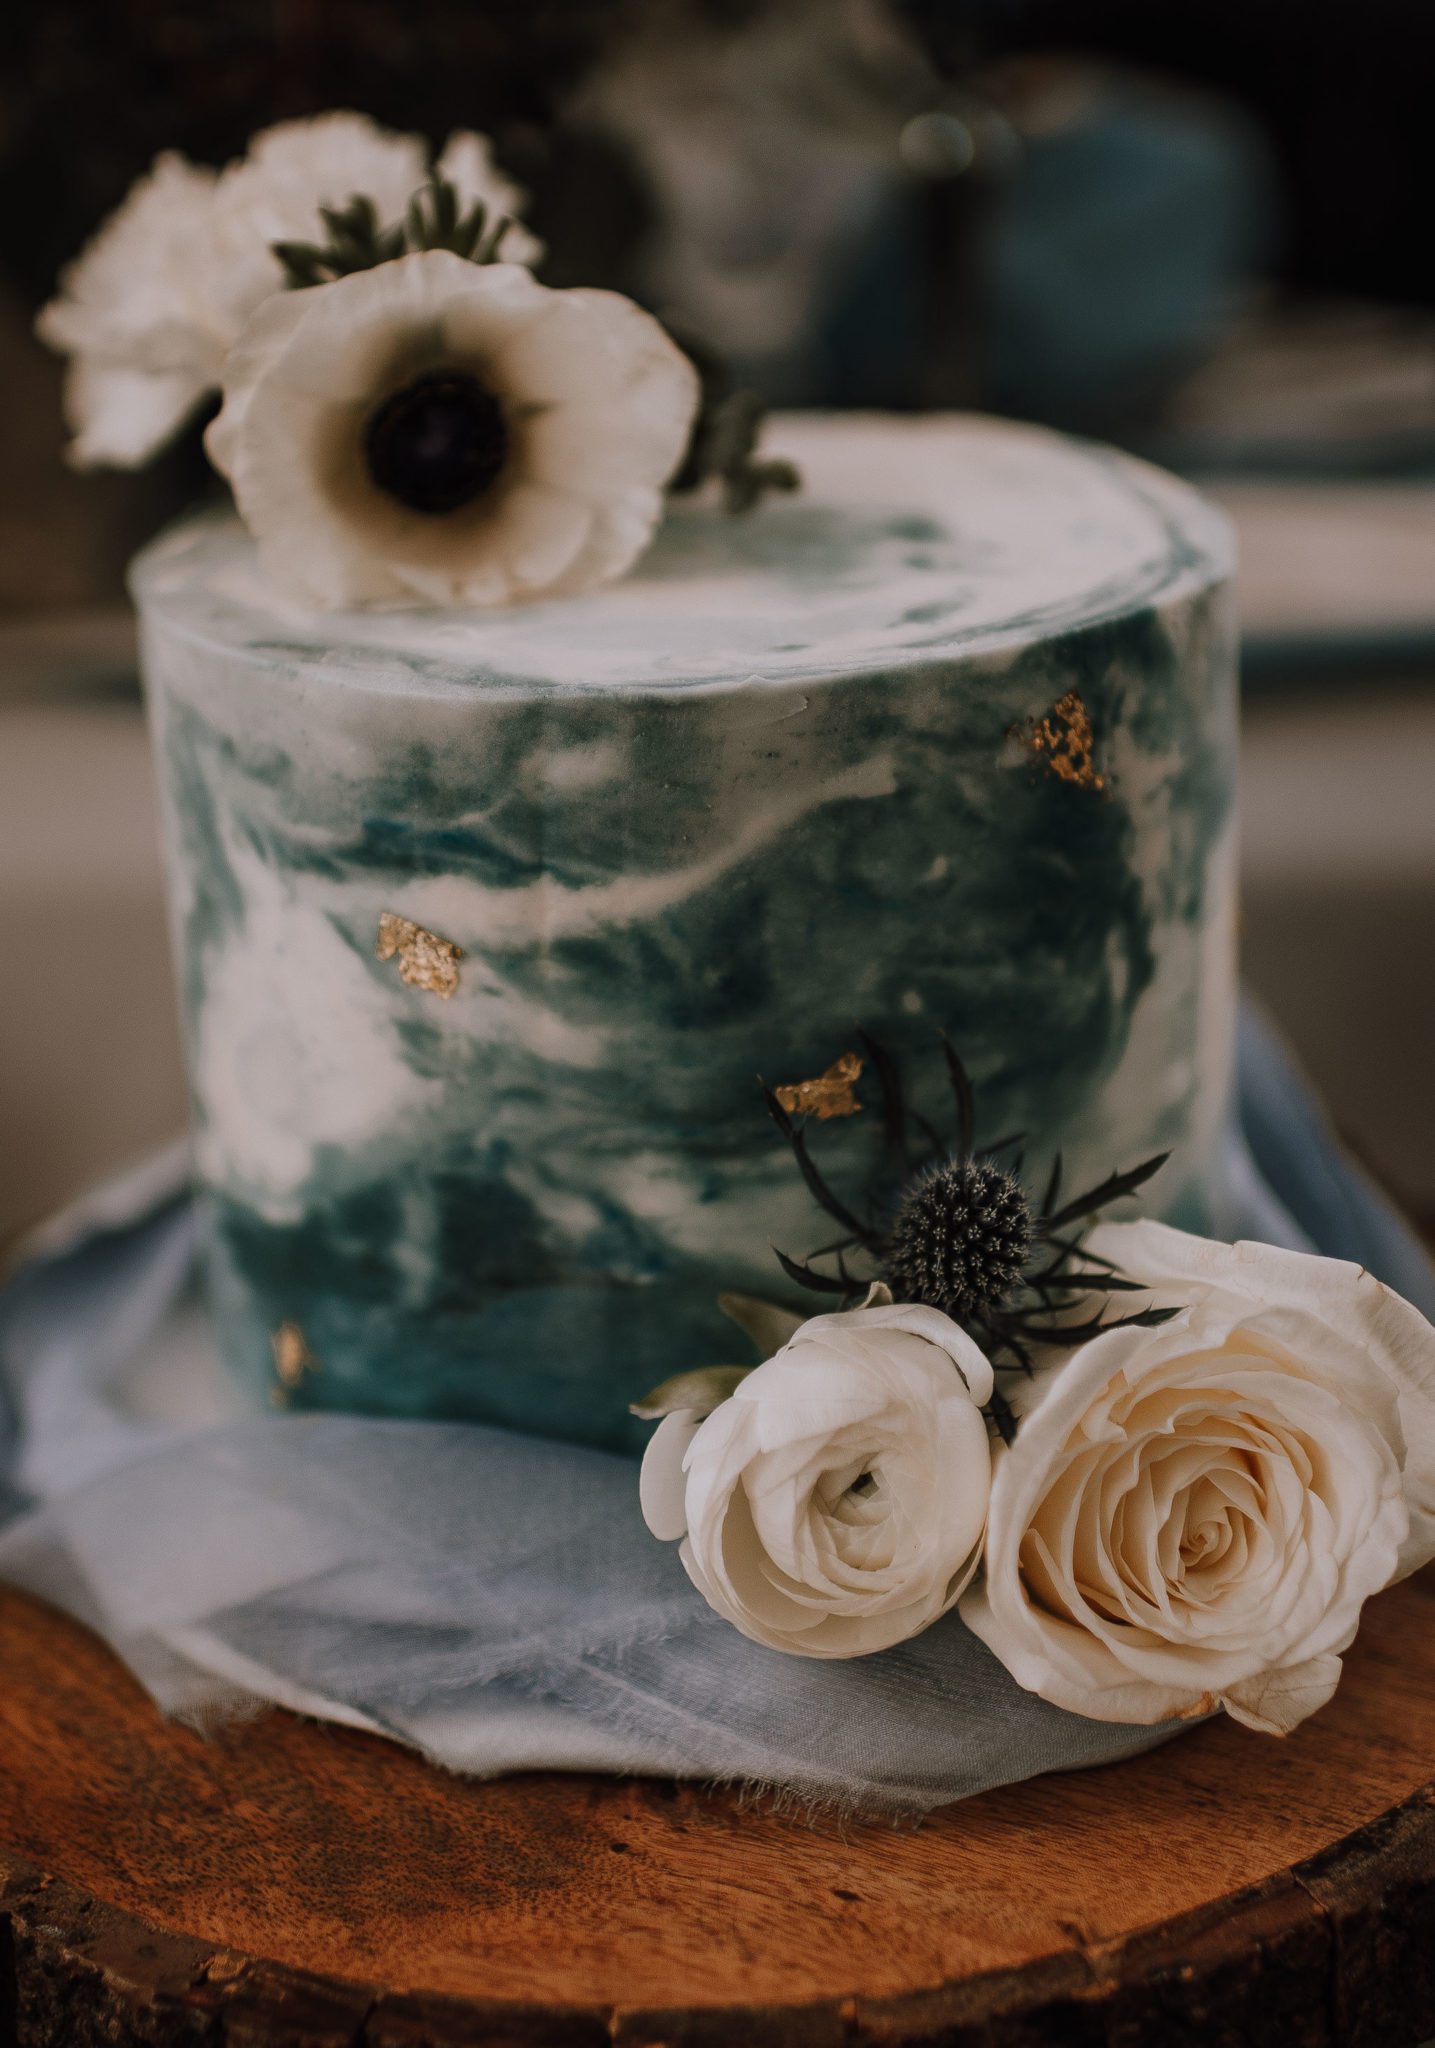 Single tiered marbled cake with blue and gold accents